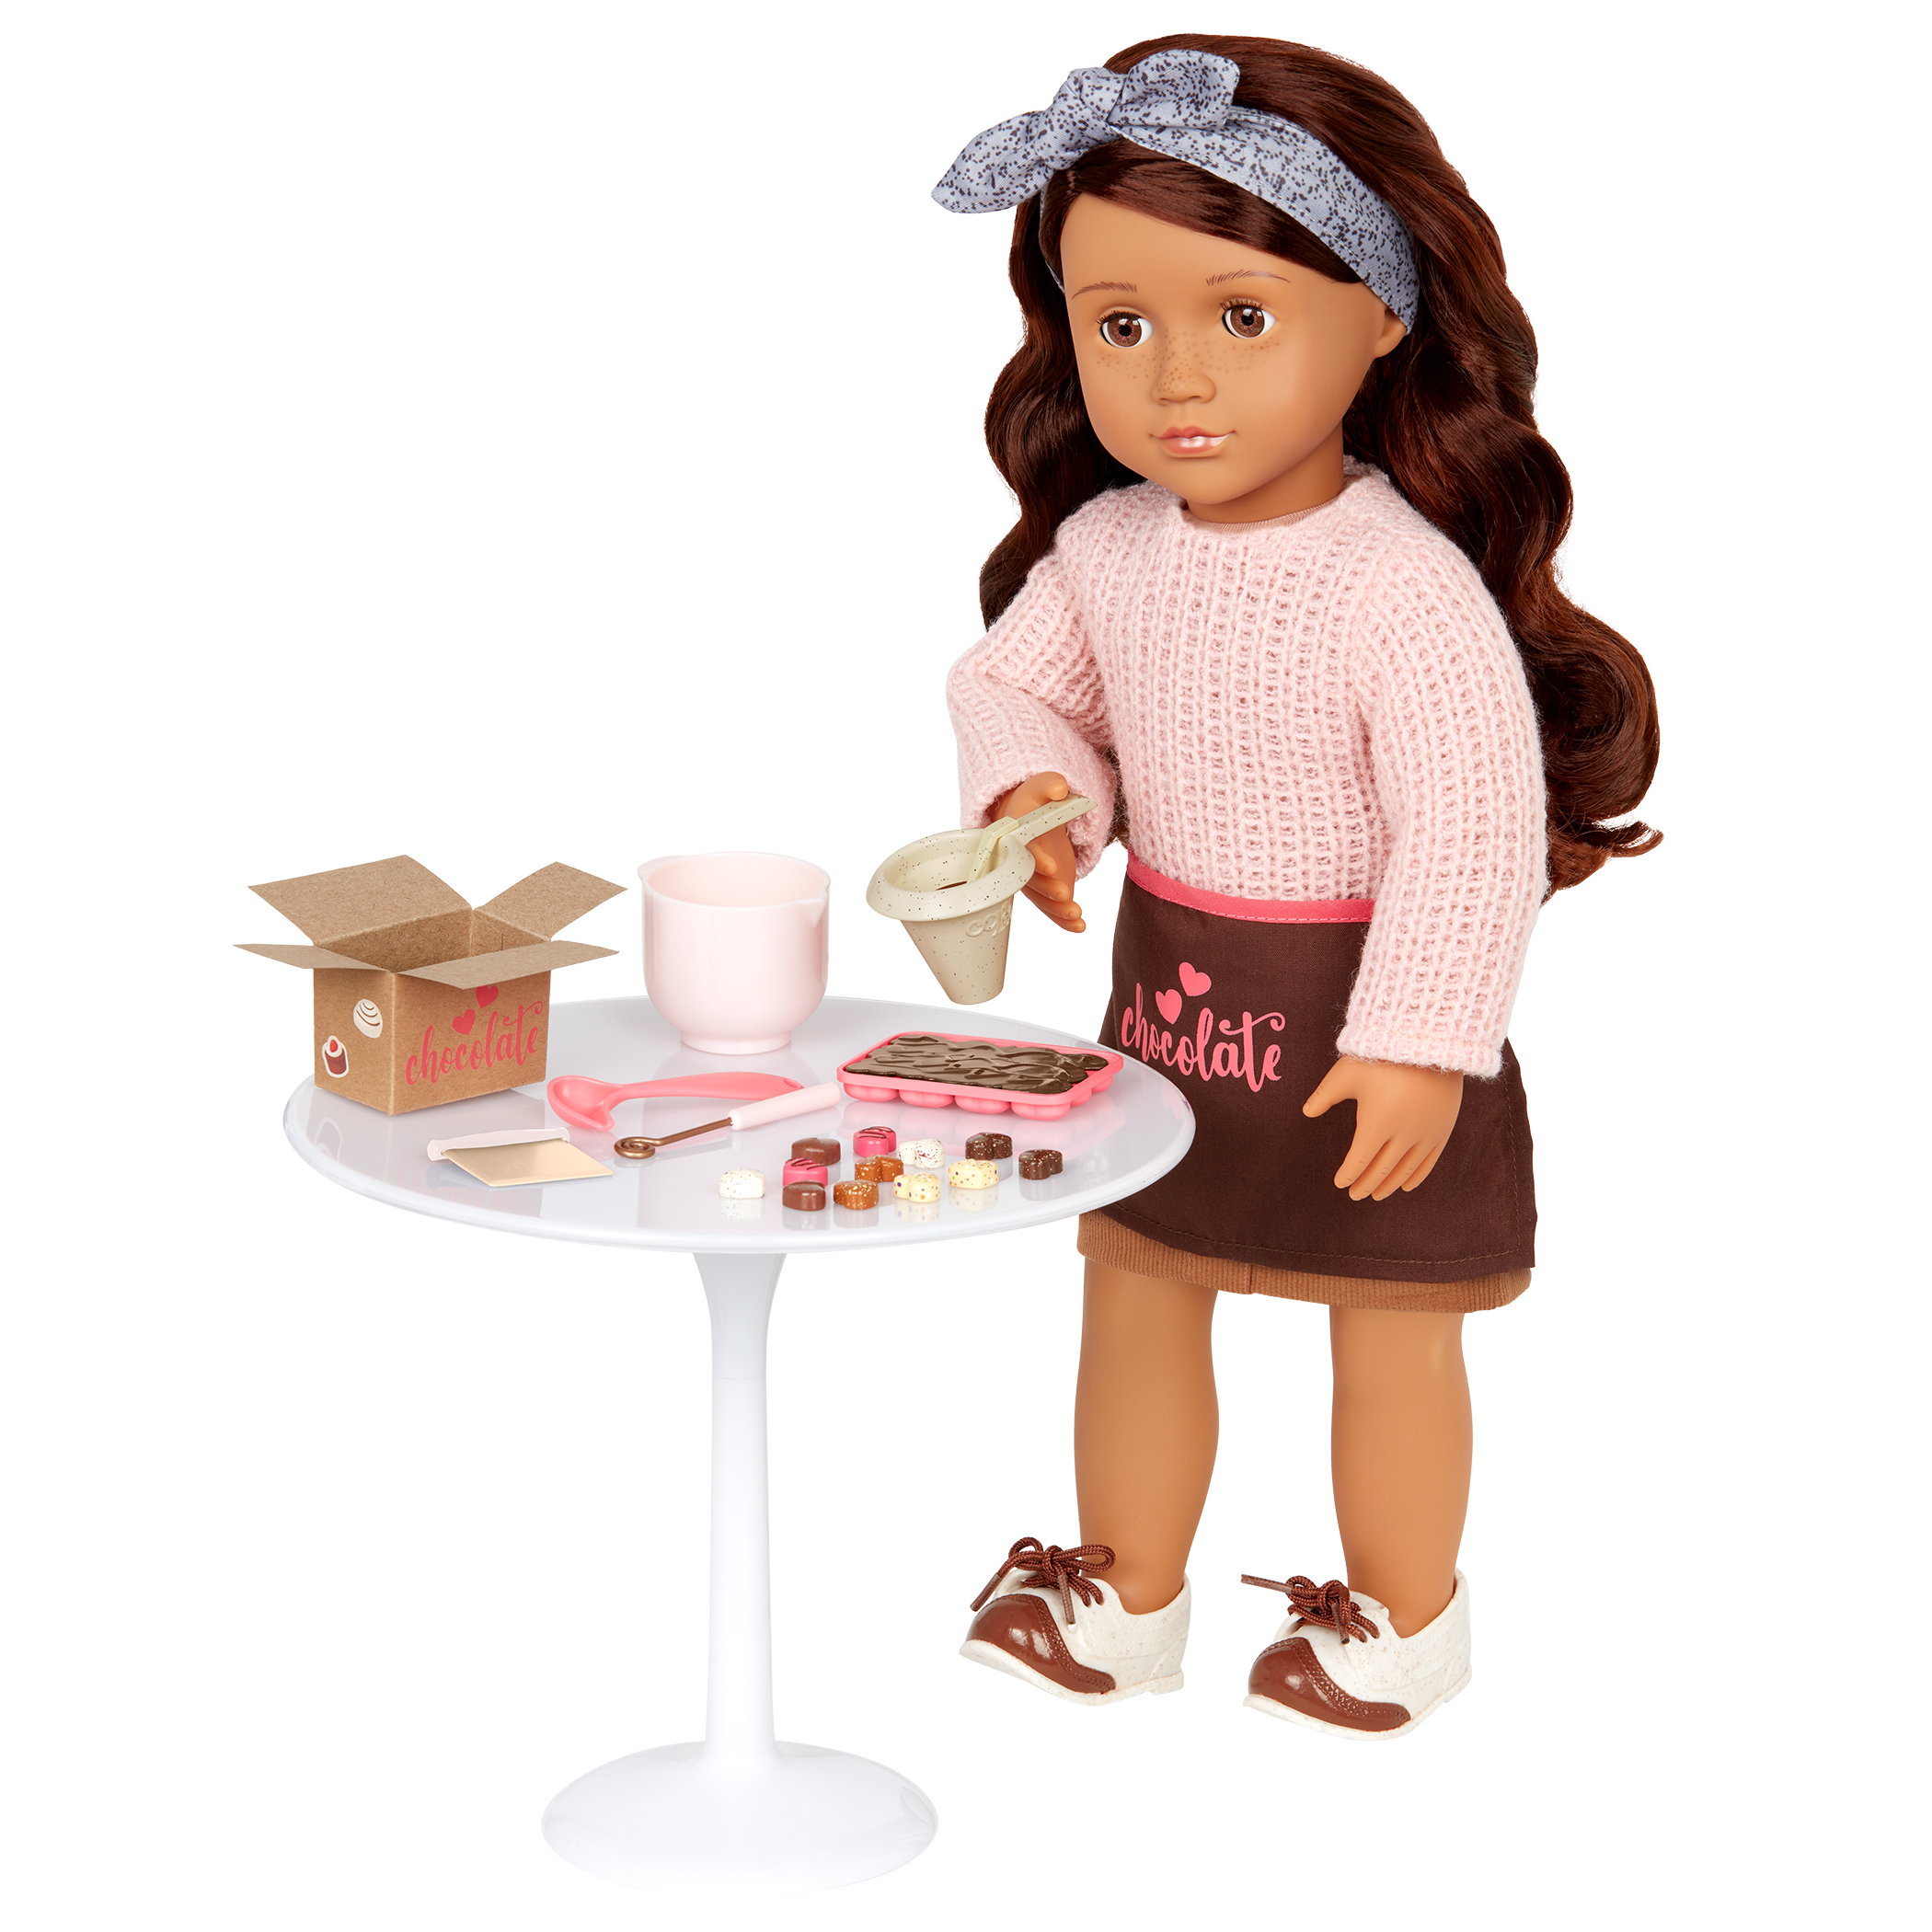 Our Generation Posable 18-inch Baker Doll Coco & Storybook